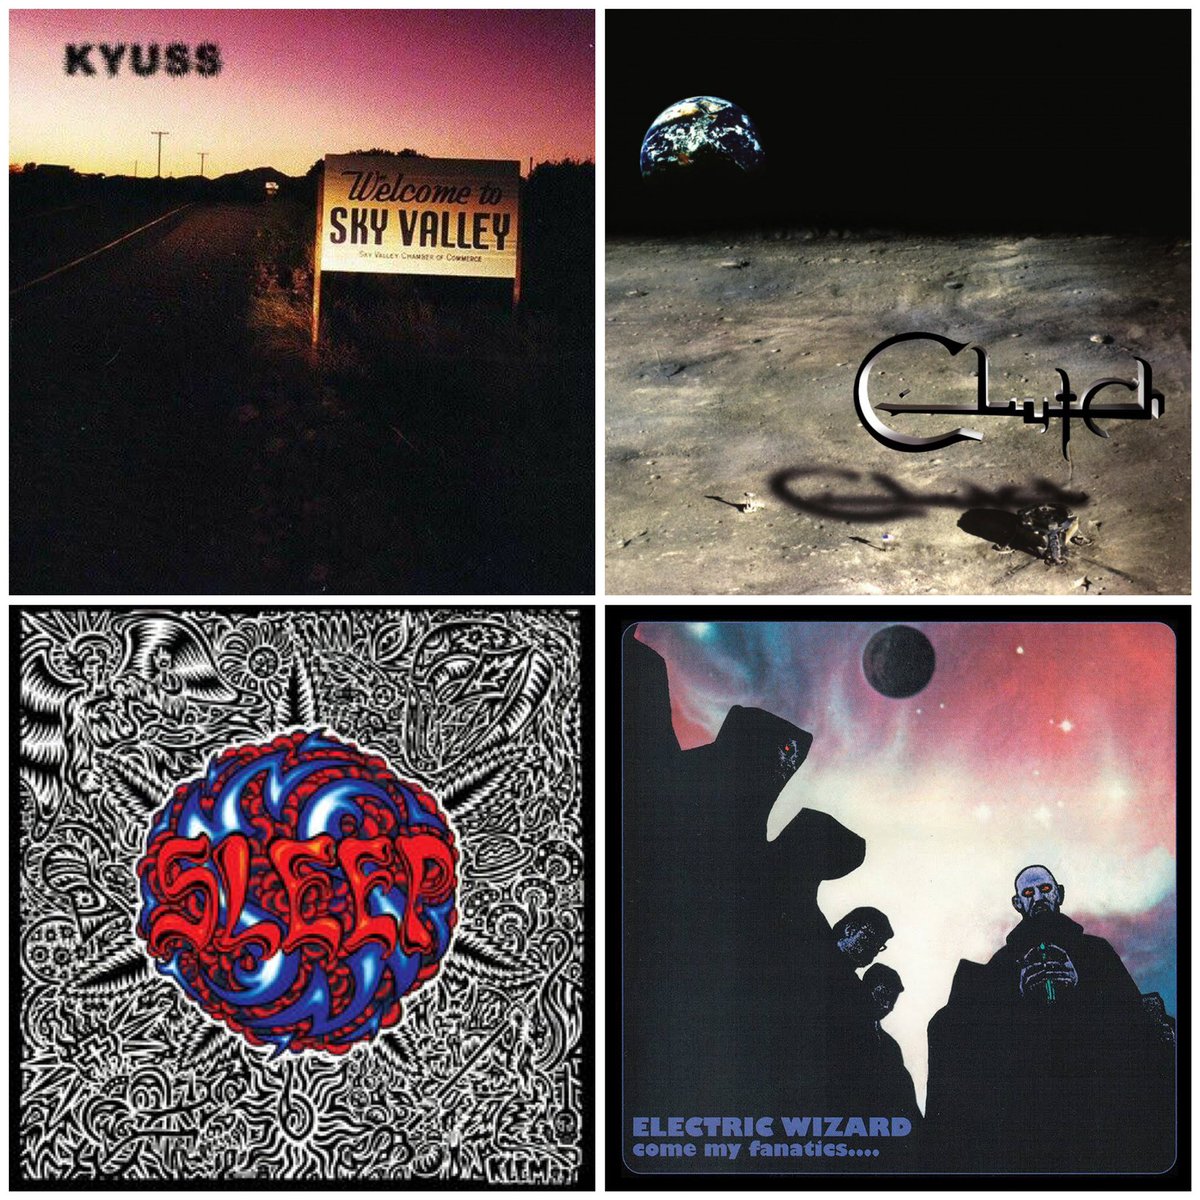 Au revoir 🫡 

Kyuss, Electric Wizard, Clutch & Sleep — you made it to the quarter finals but alas, your journey ends here…

… now for the semis… 😈 #90sMetal